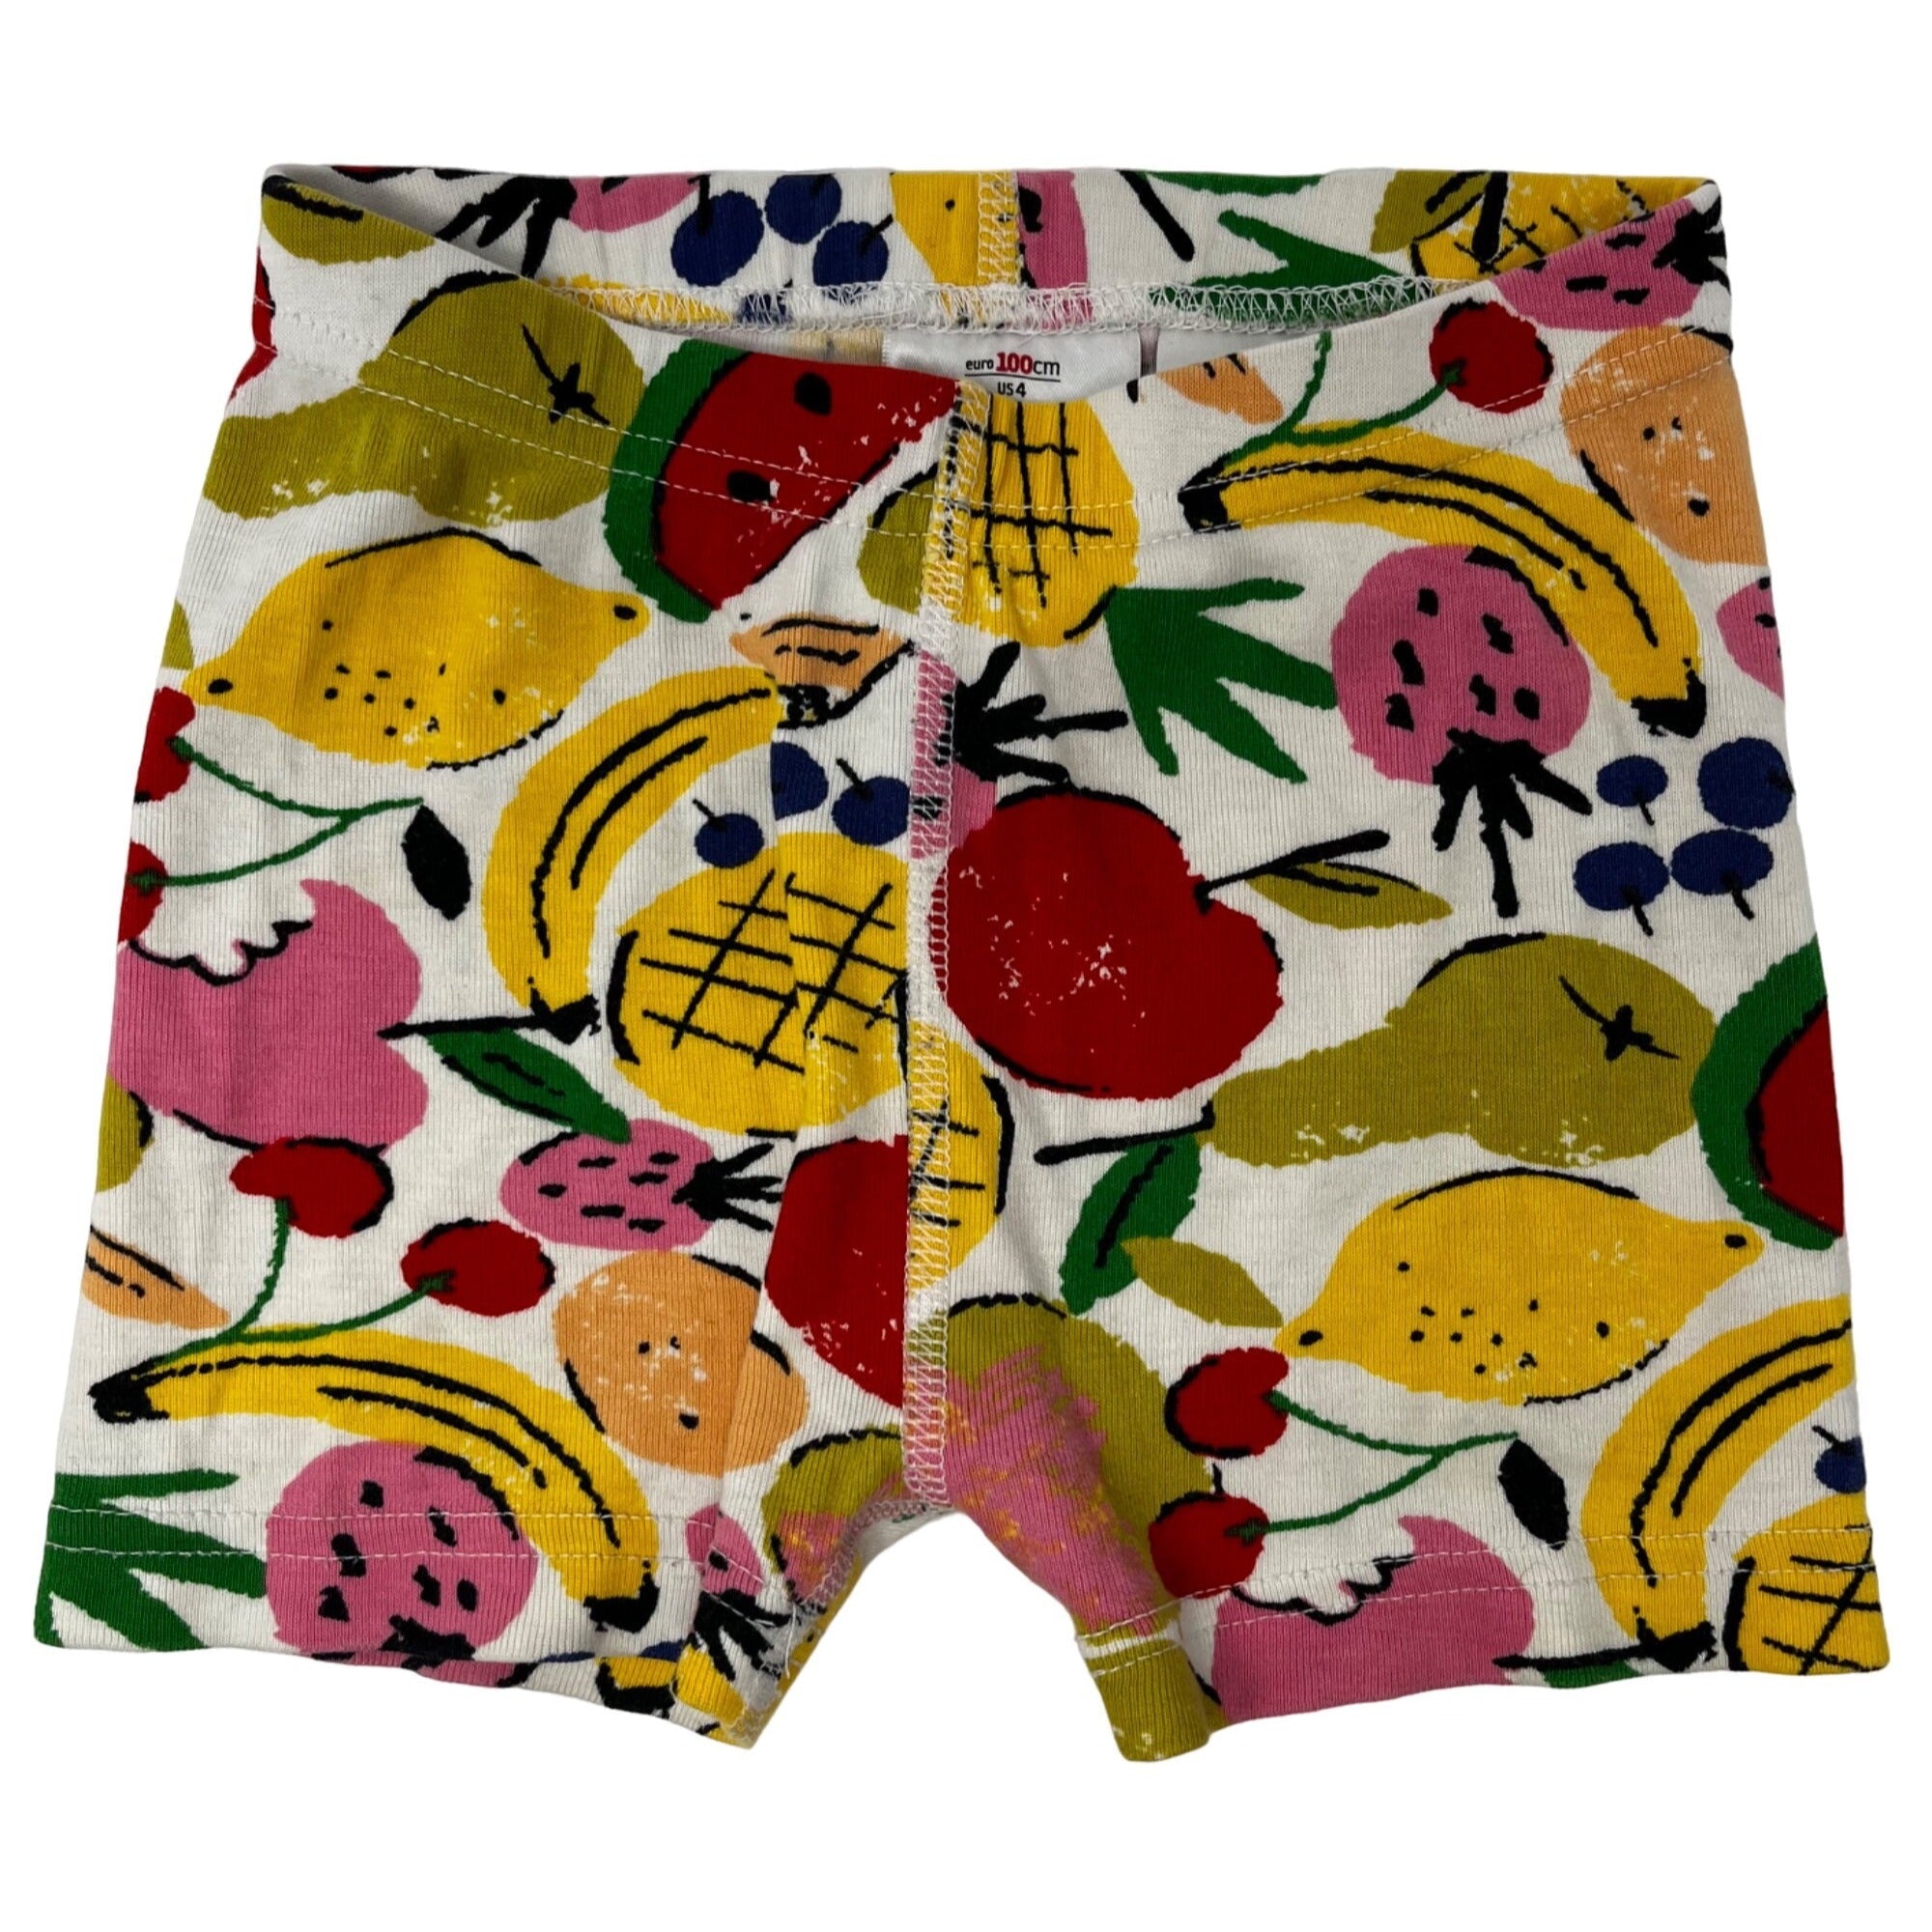 Hanna Andersson Girl's Size 4 Yellow/Pink/Green/Red Fruit Print Shorts